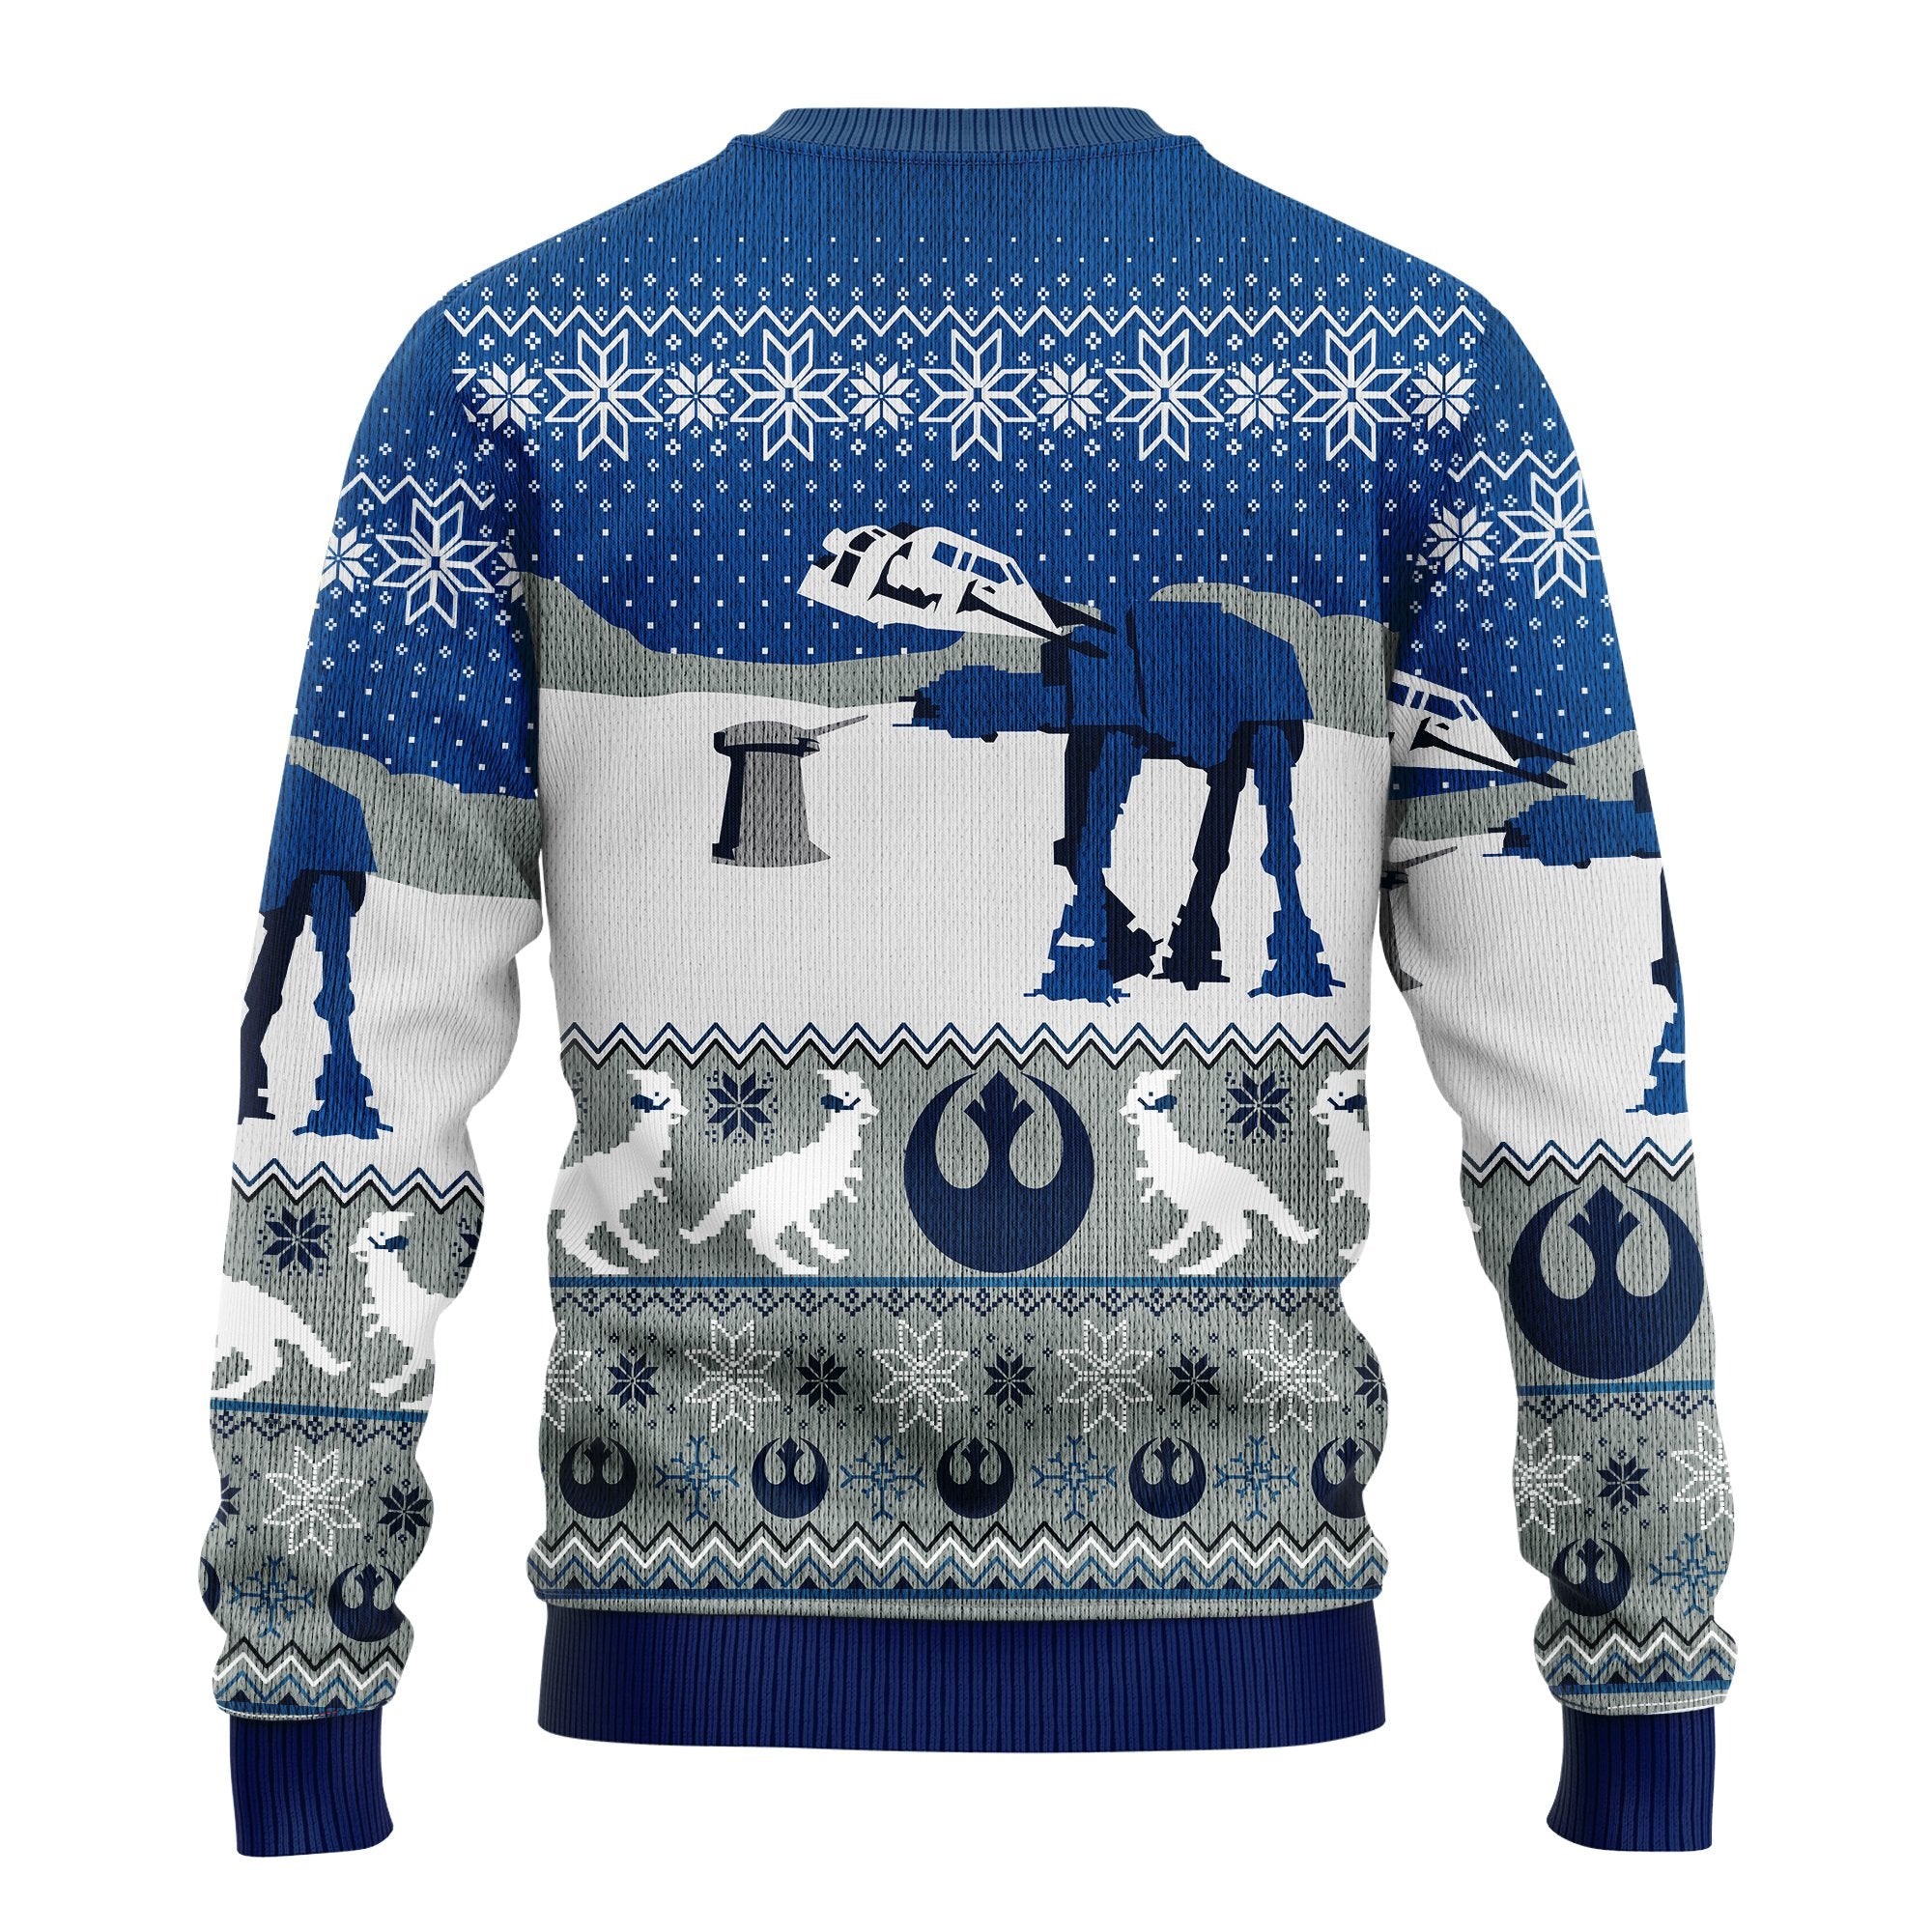 Star Wars Blue Winter Ugly Christmas Sweater Amazing Gift Idea Thanksgiving Gift